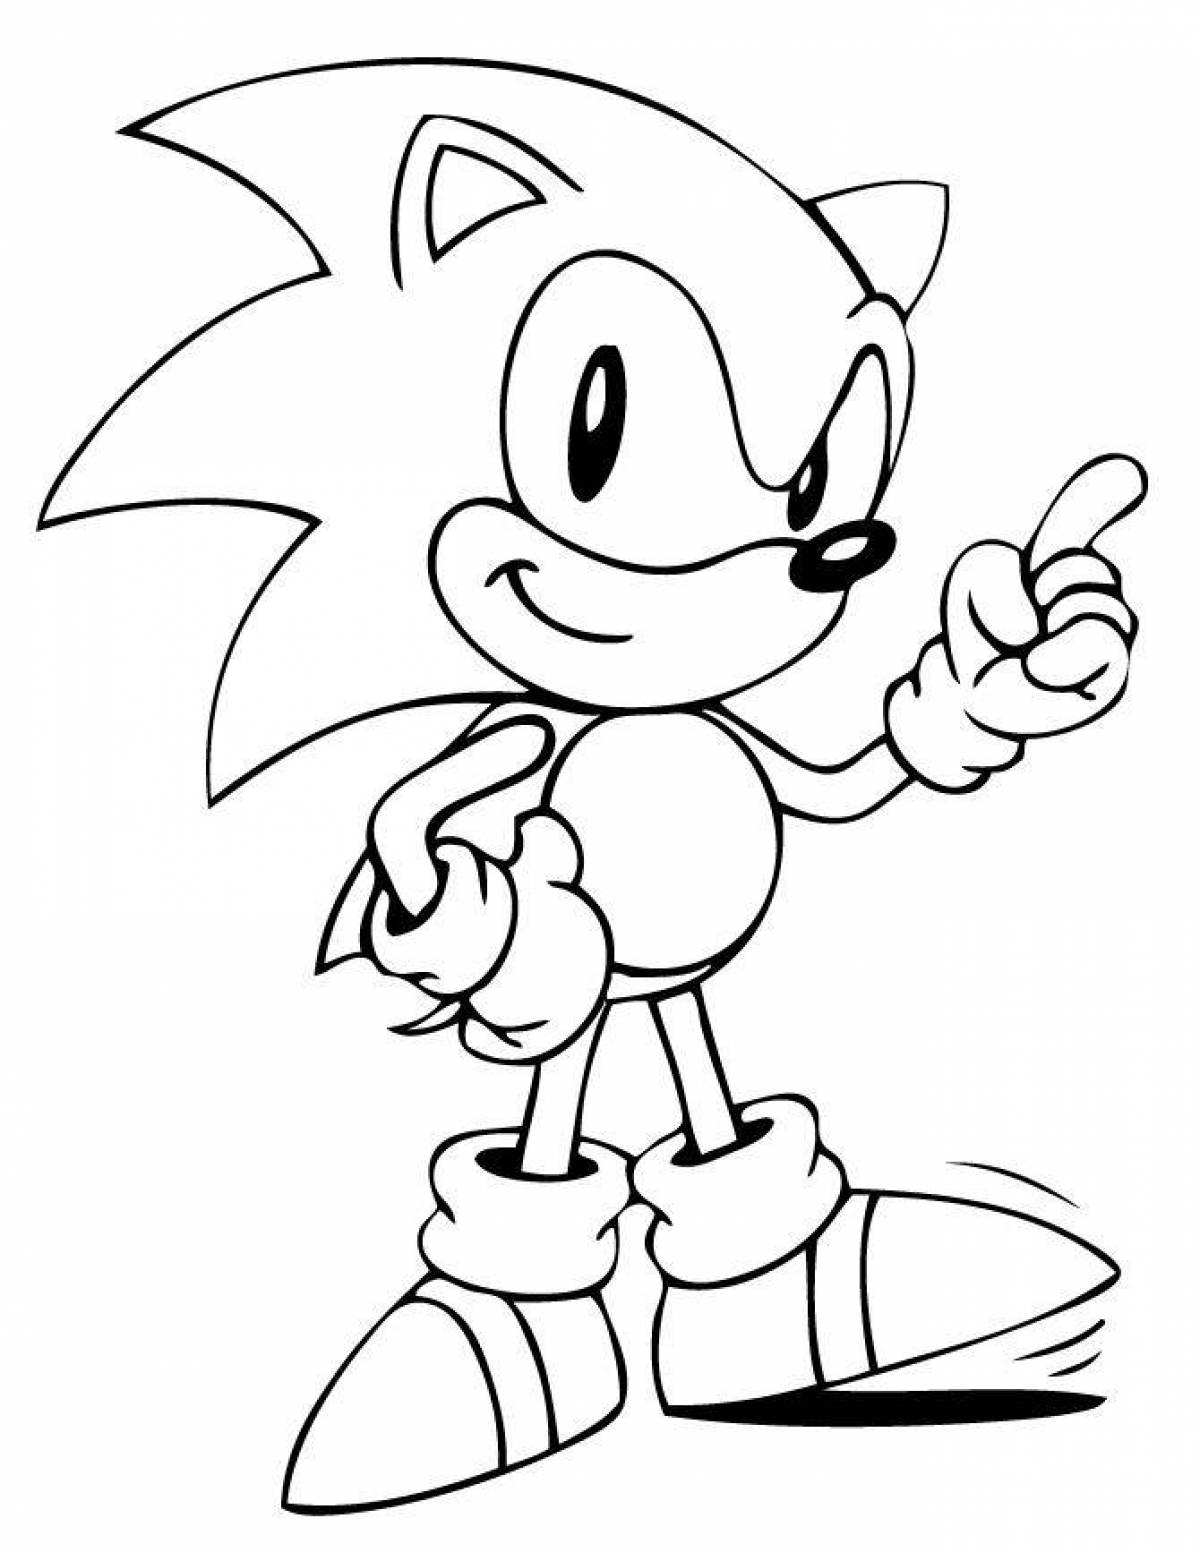 Great coloring drawing of sonic